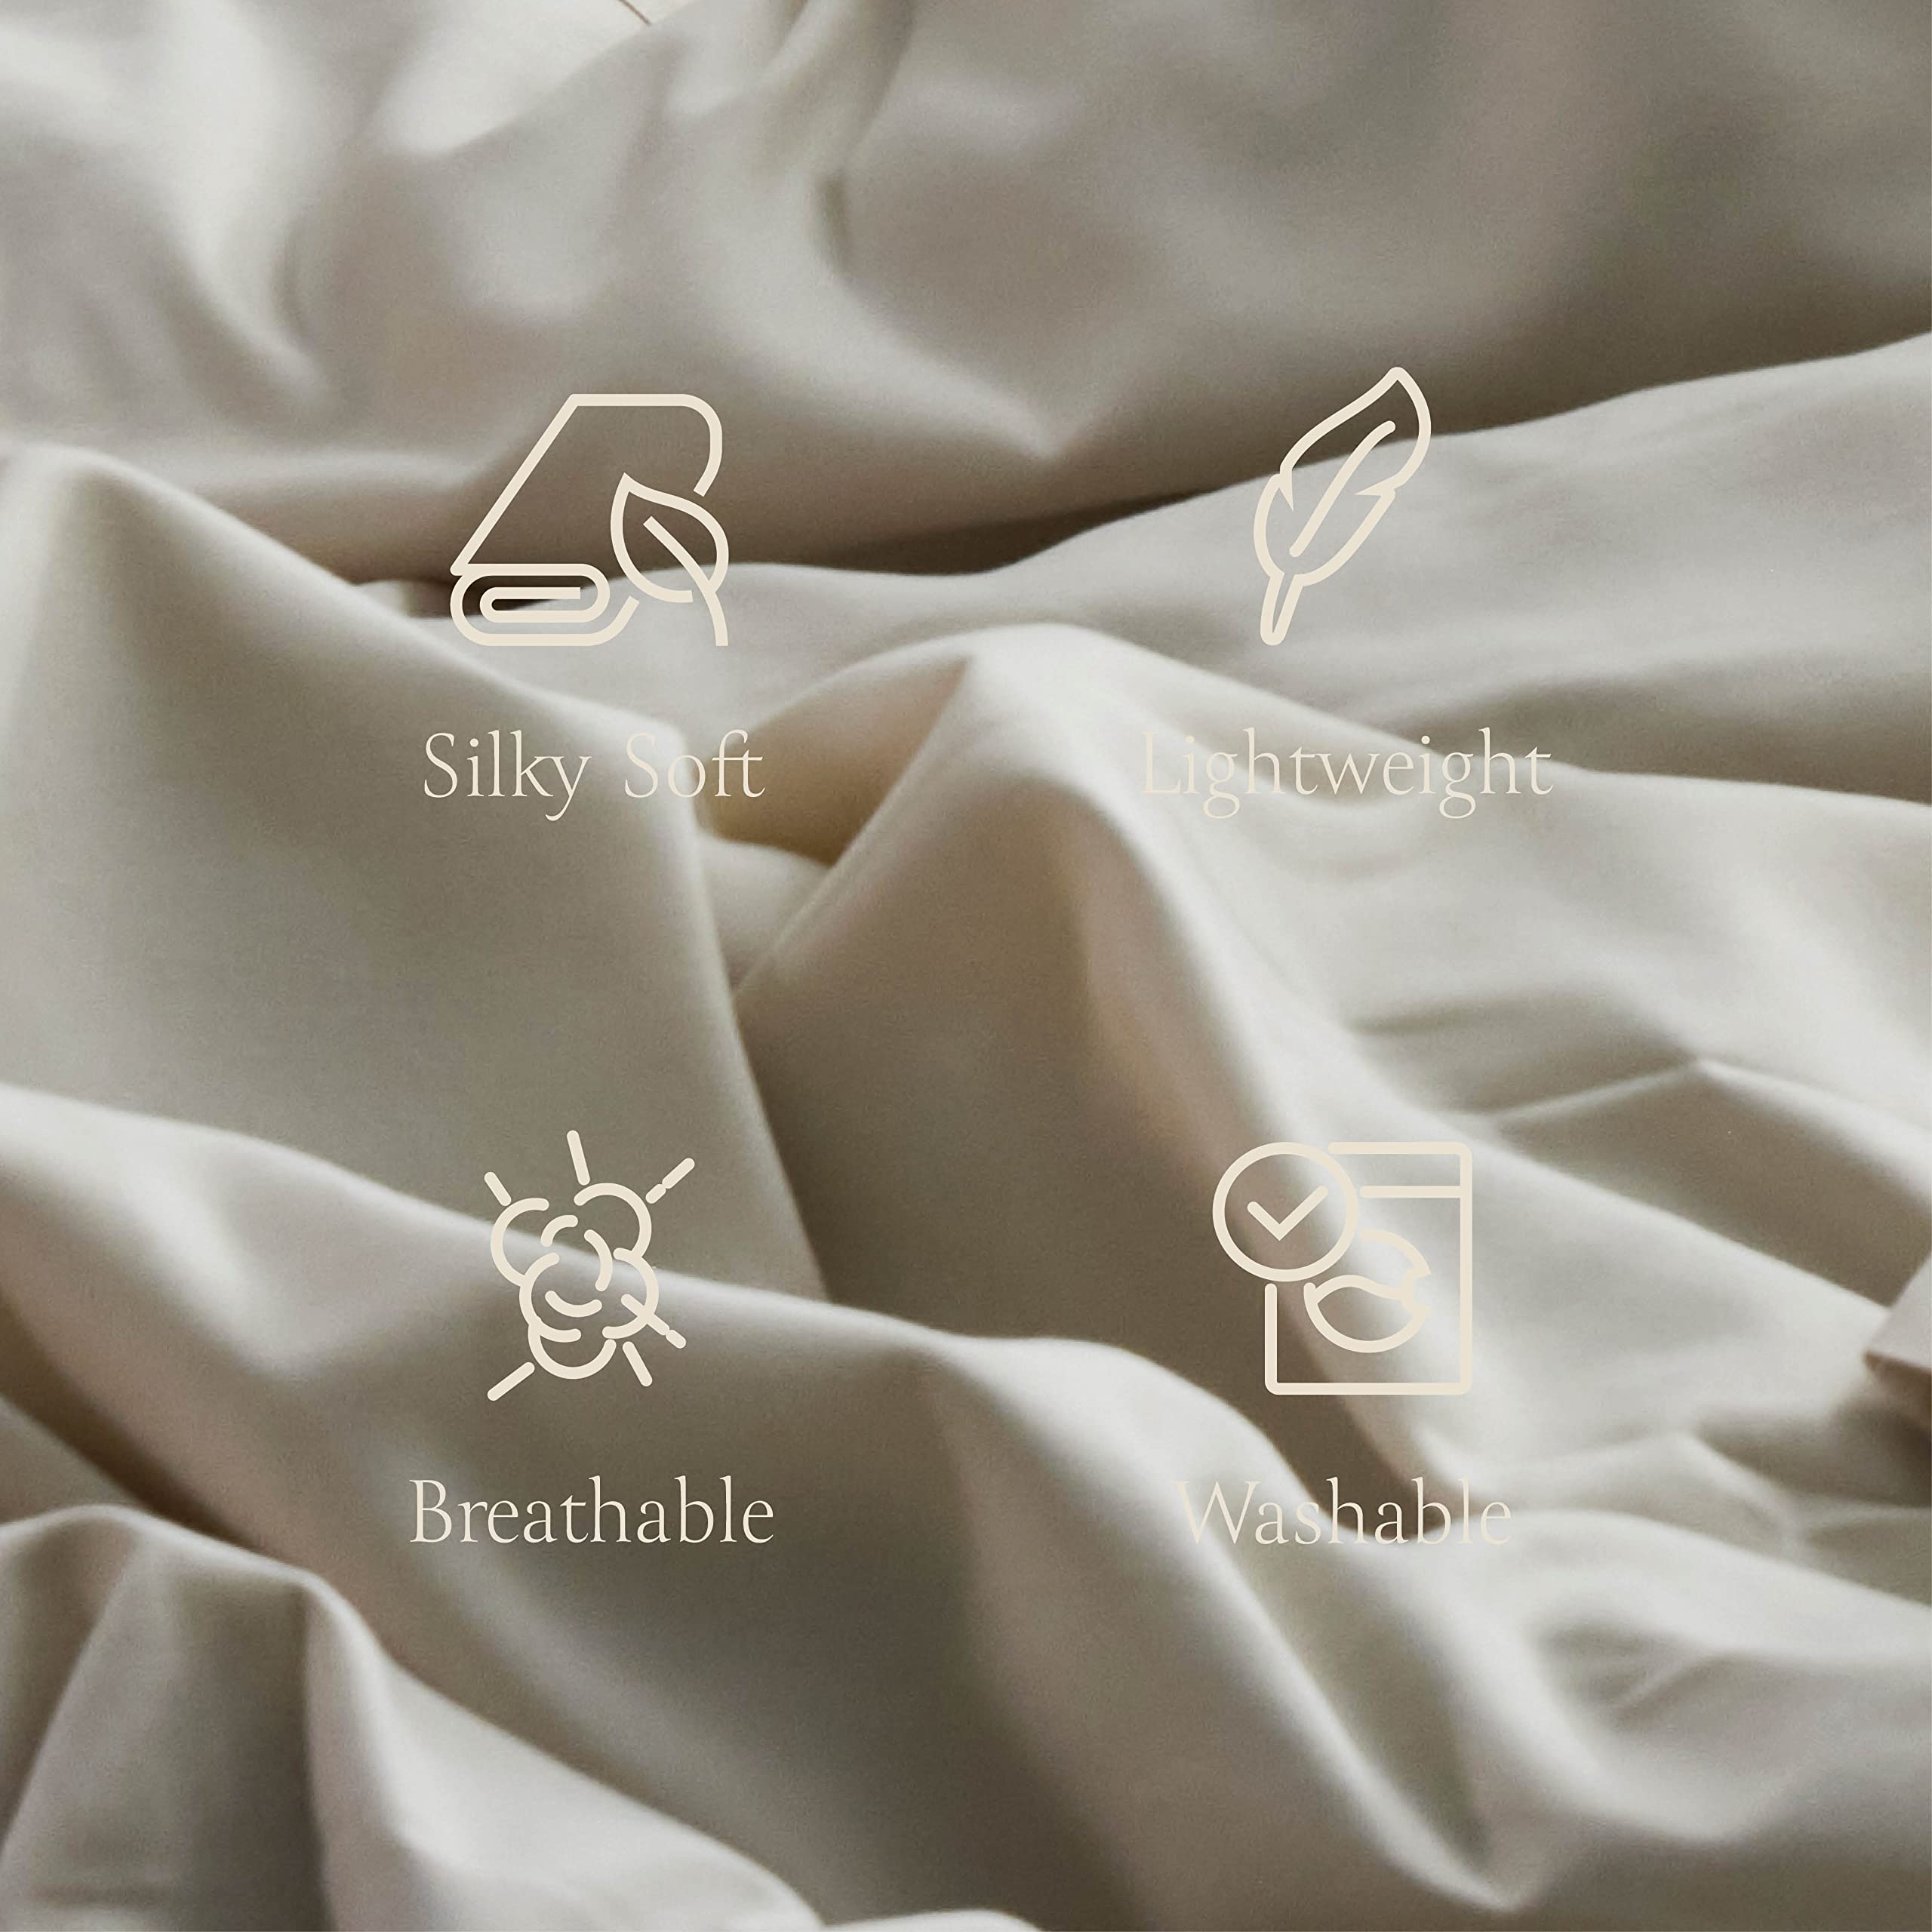 BELADOR Silky Soft Full Sheet Set - Luxury 6 Piece Bed Sheets for Full Size Bed, Secure-Fit Deep Pocket Sheets with Elastic, Breathable Hotel Sheets and Pillowcase Set, Wrinkle Free Oeko-Tex Sheets  - Very Good